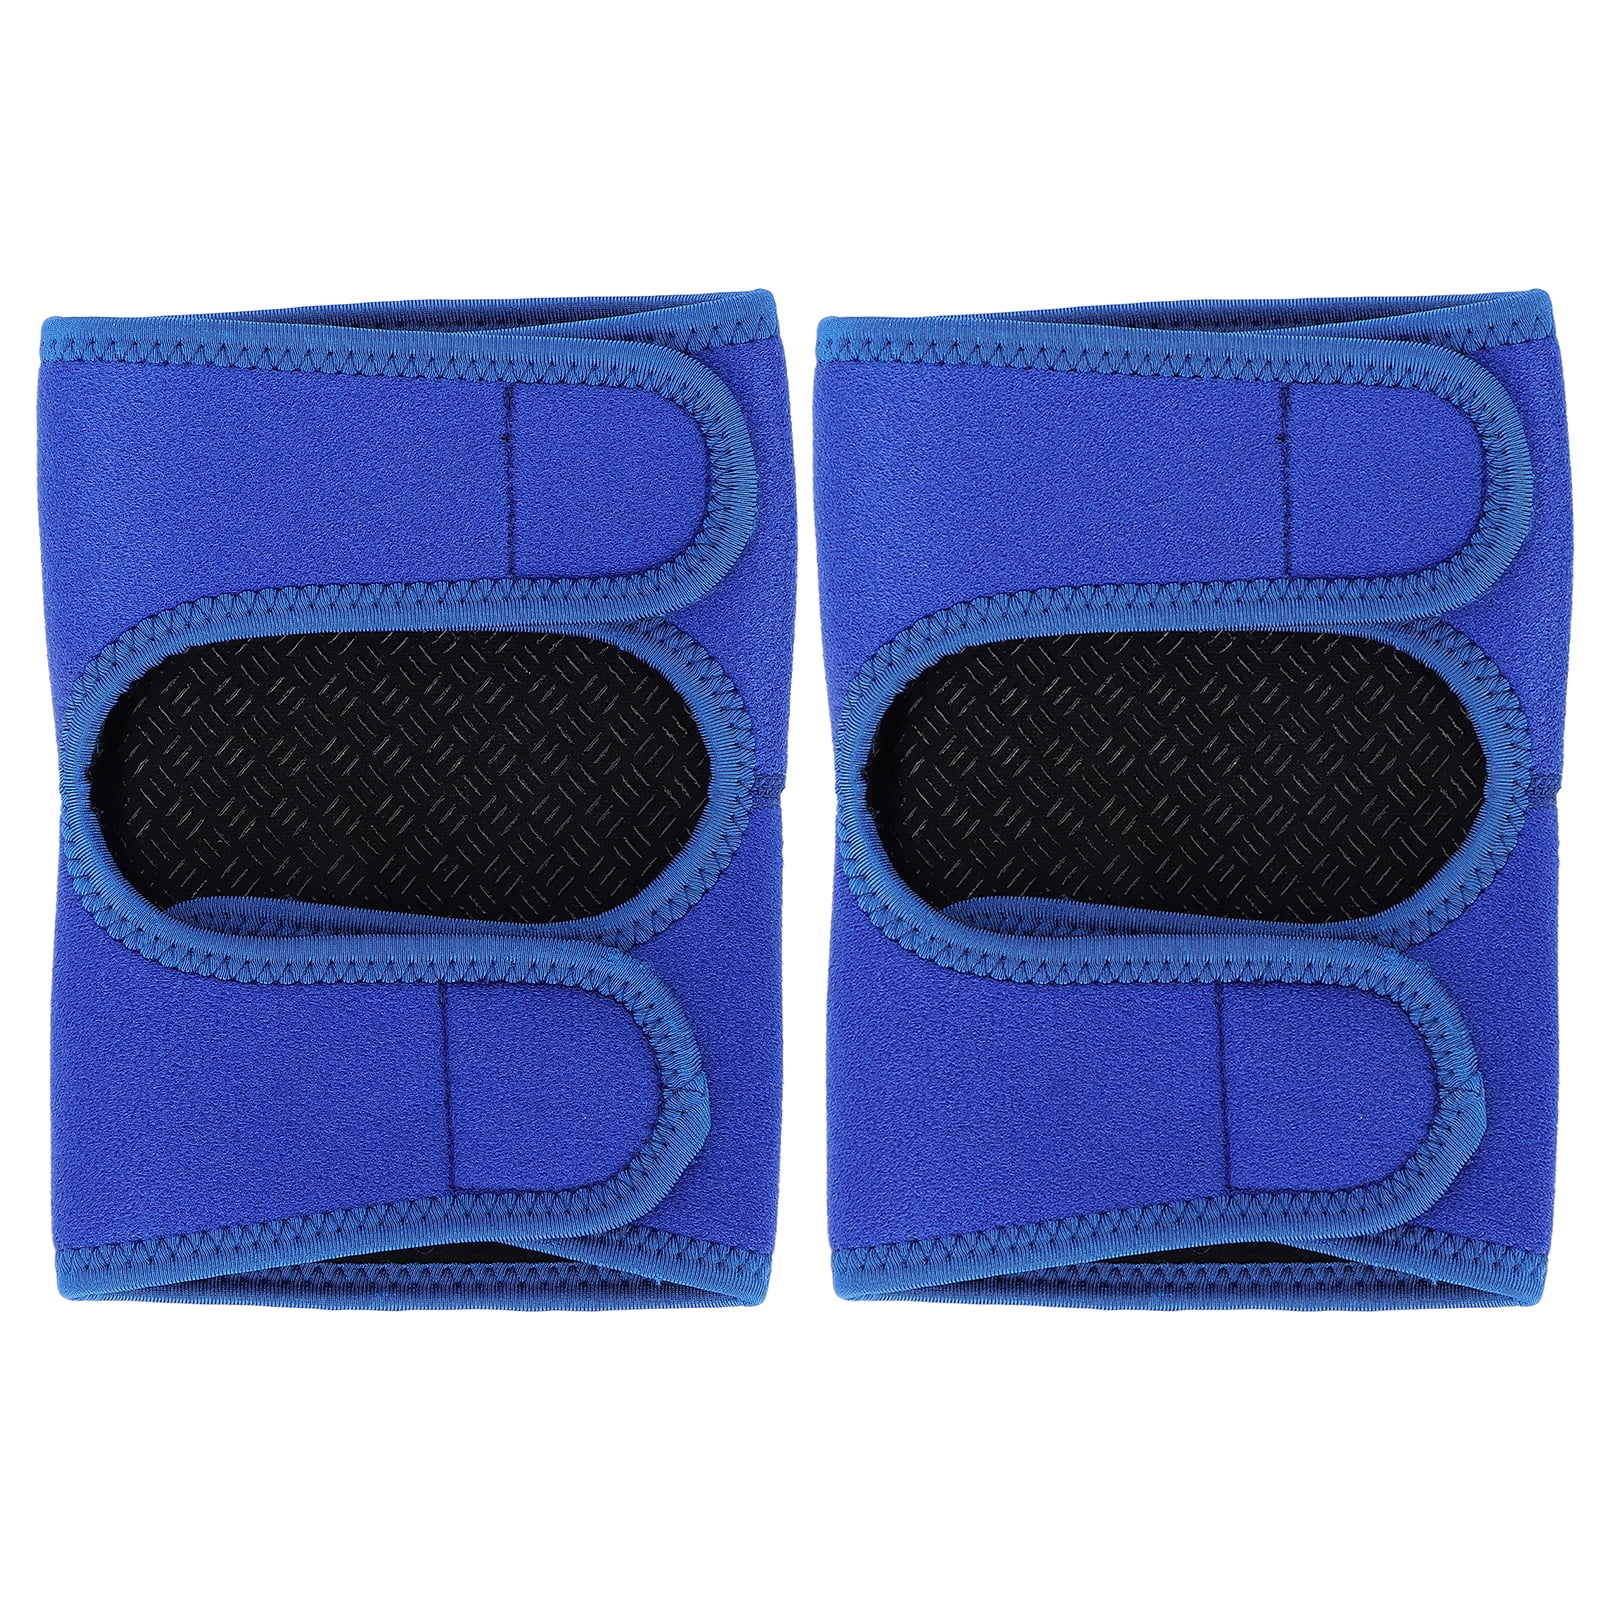 Sponge Knee Pads, Easy And Comfortable To Wear Can Adjust The Tightness ...